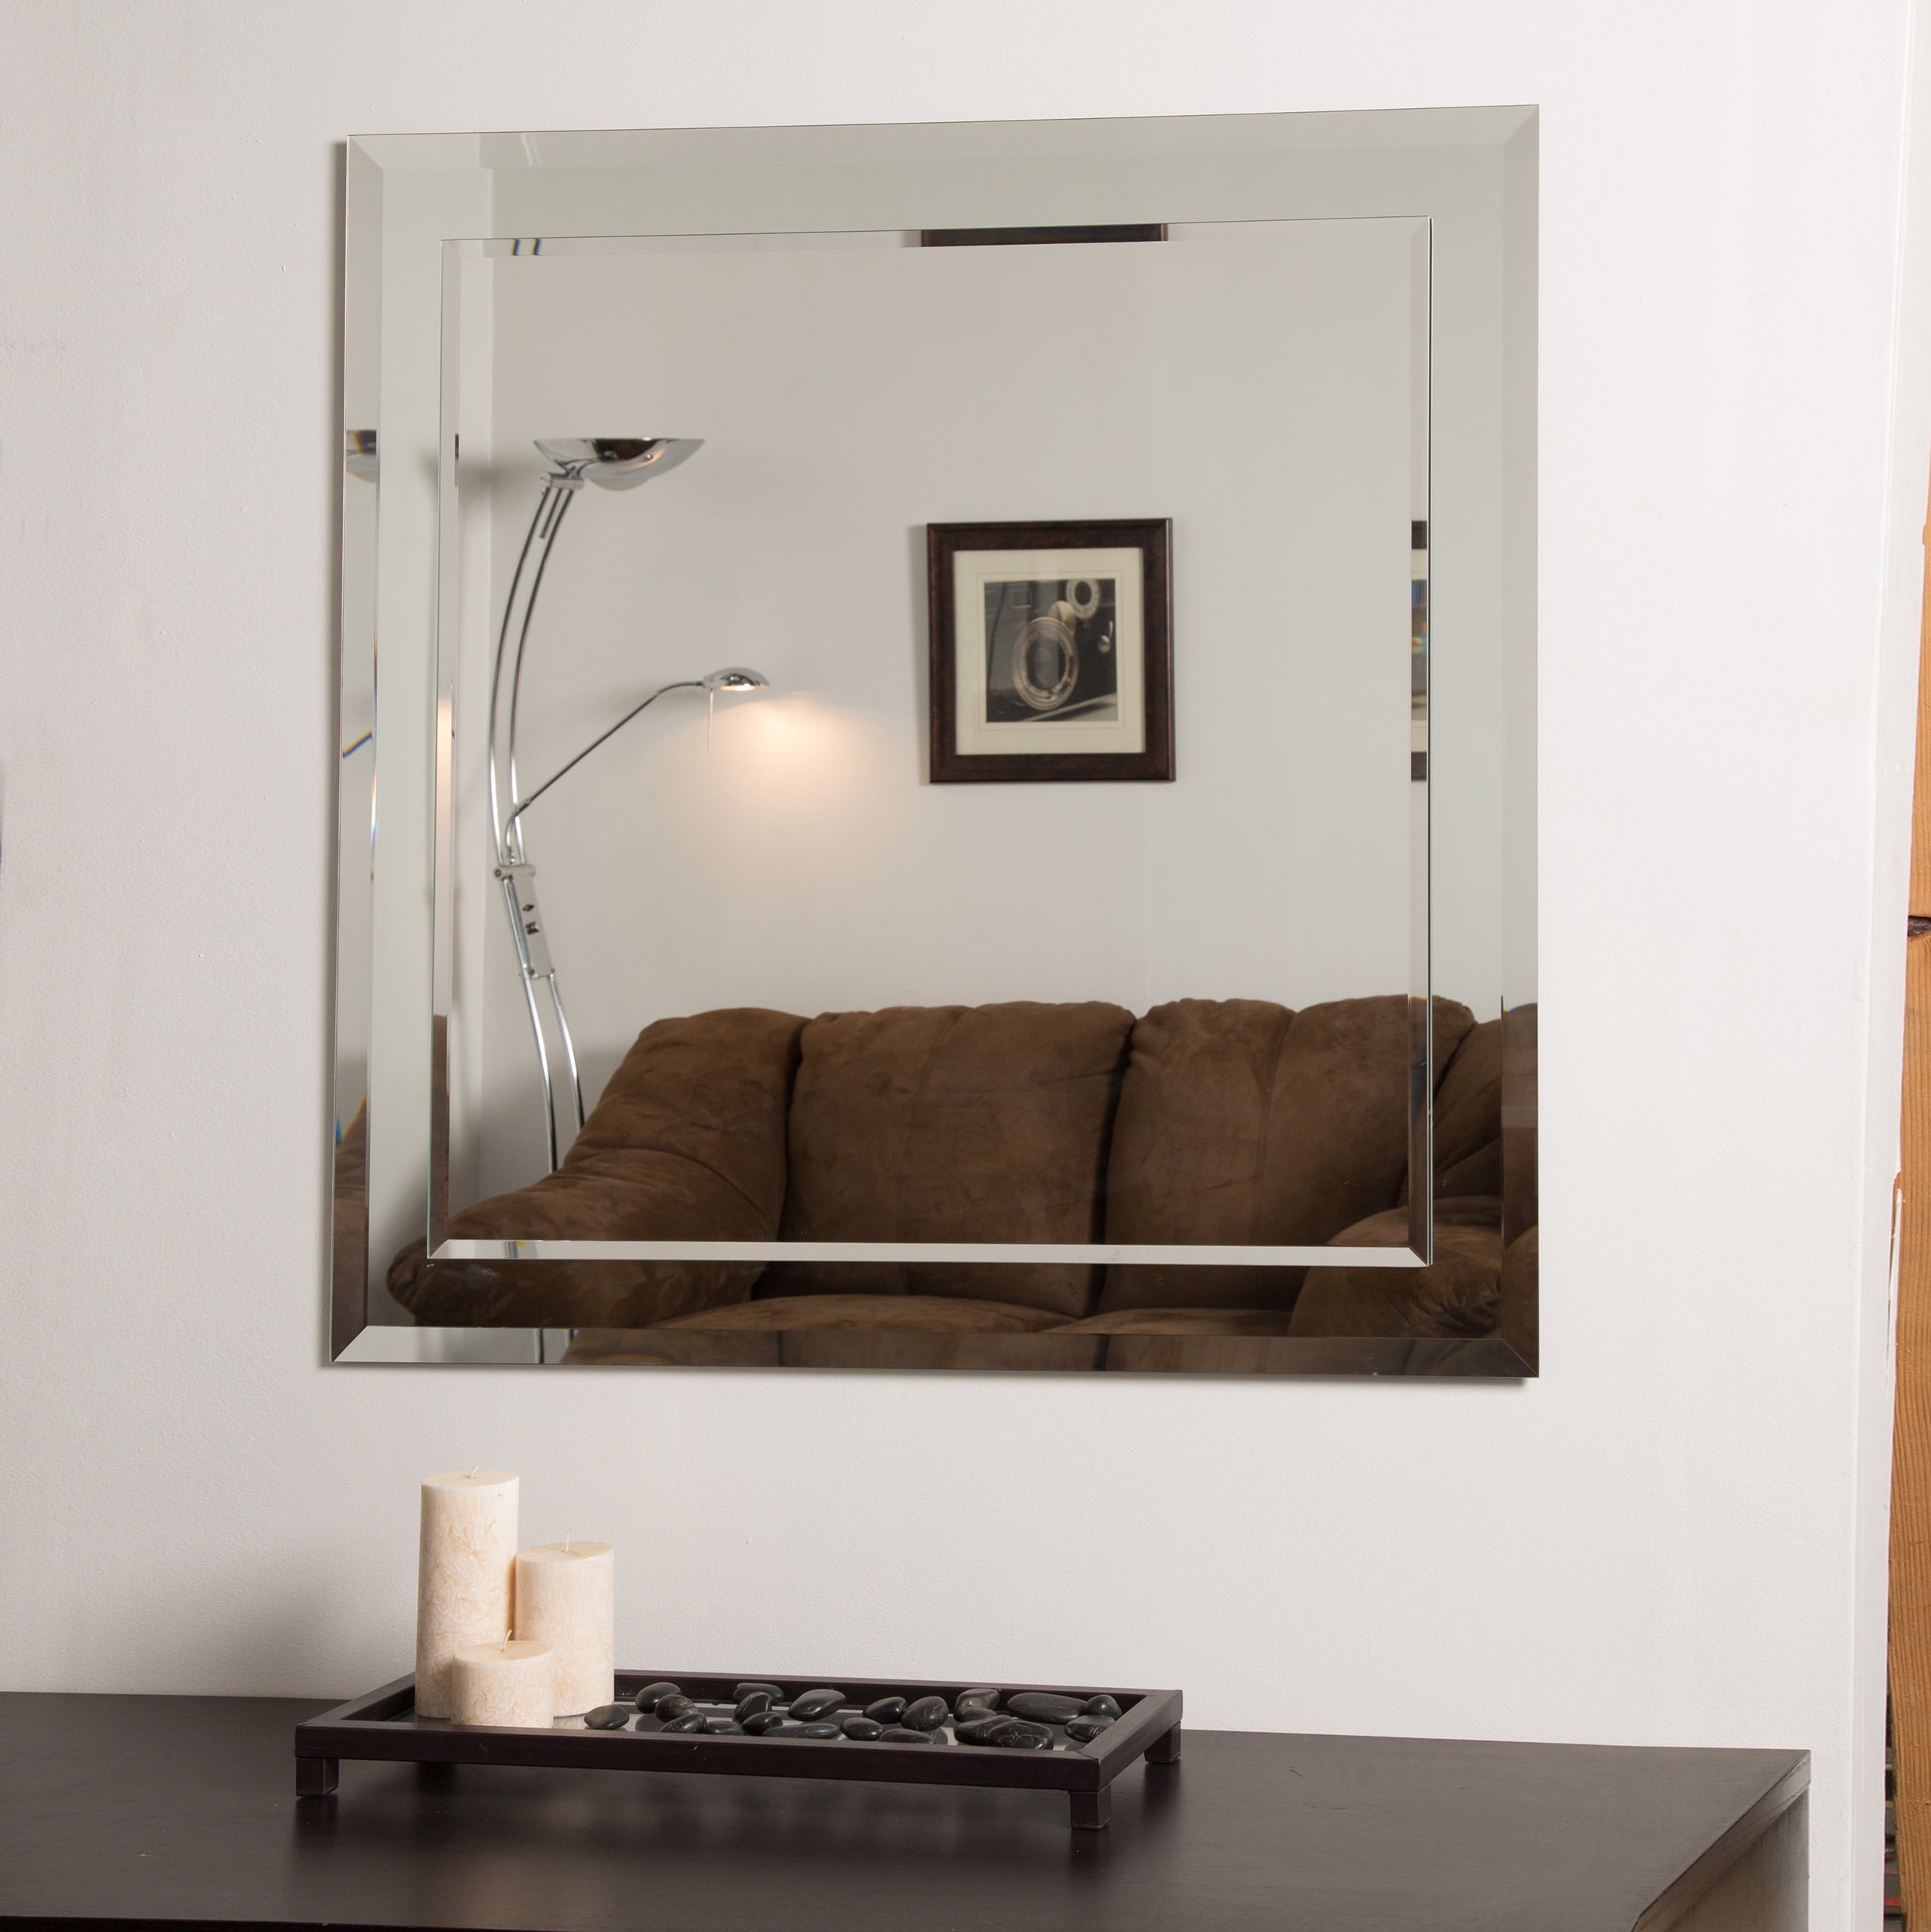 Frameless Wall Mirror: A Reflection Of Style And Sophistication